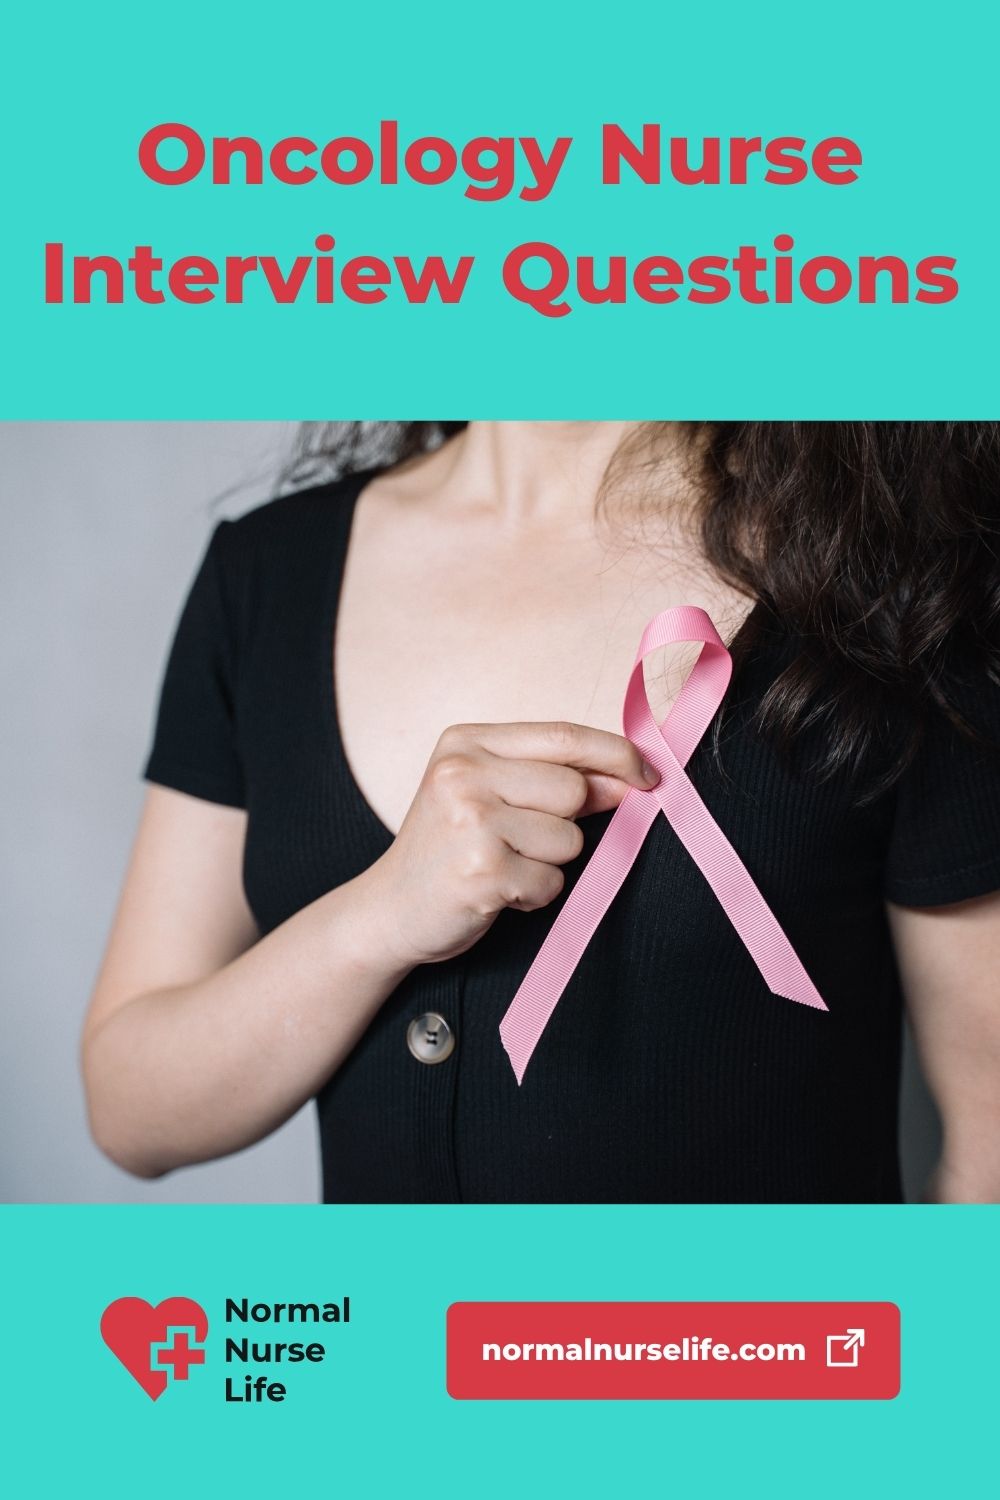 Interview questions for oncology nurses